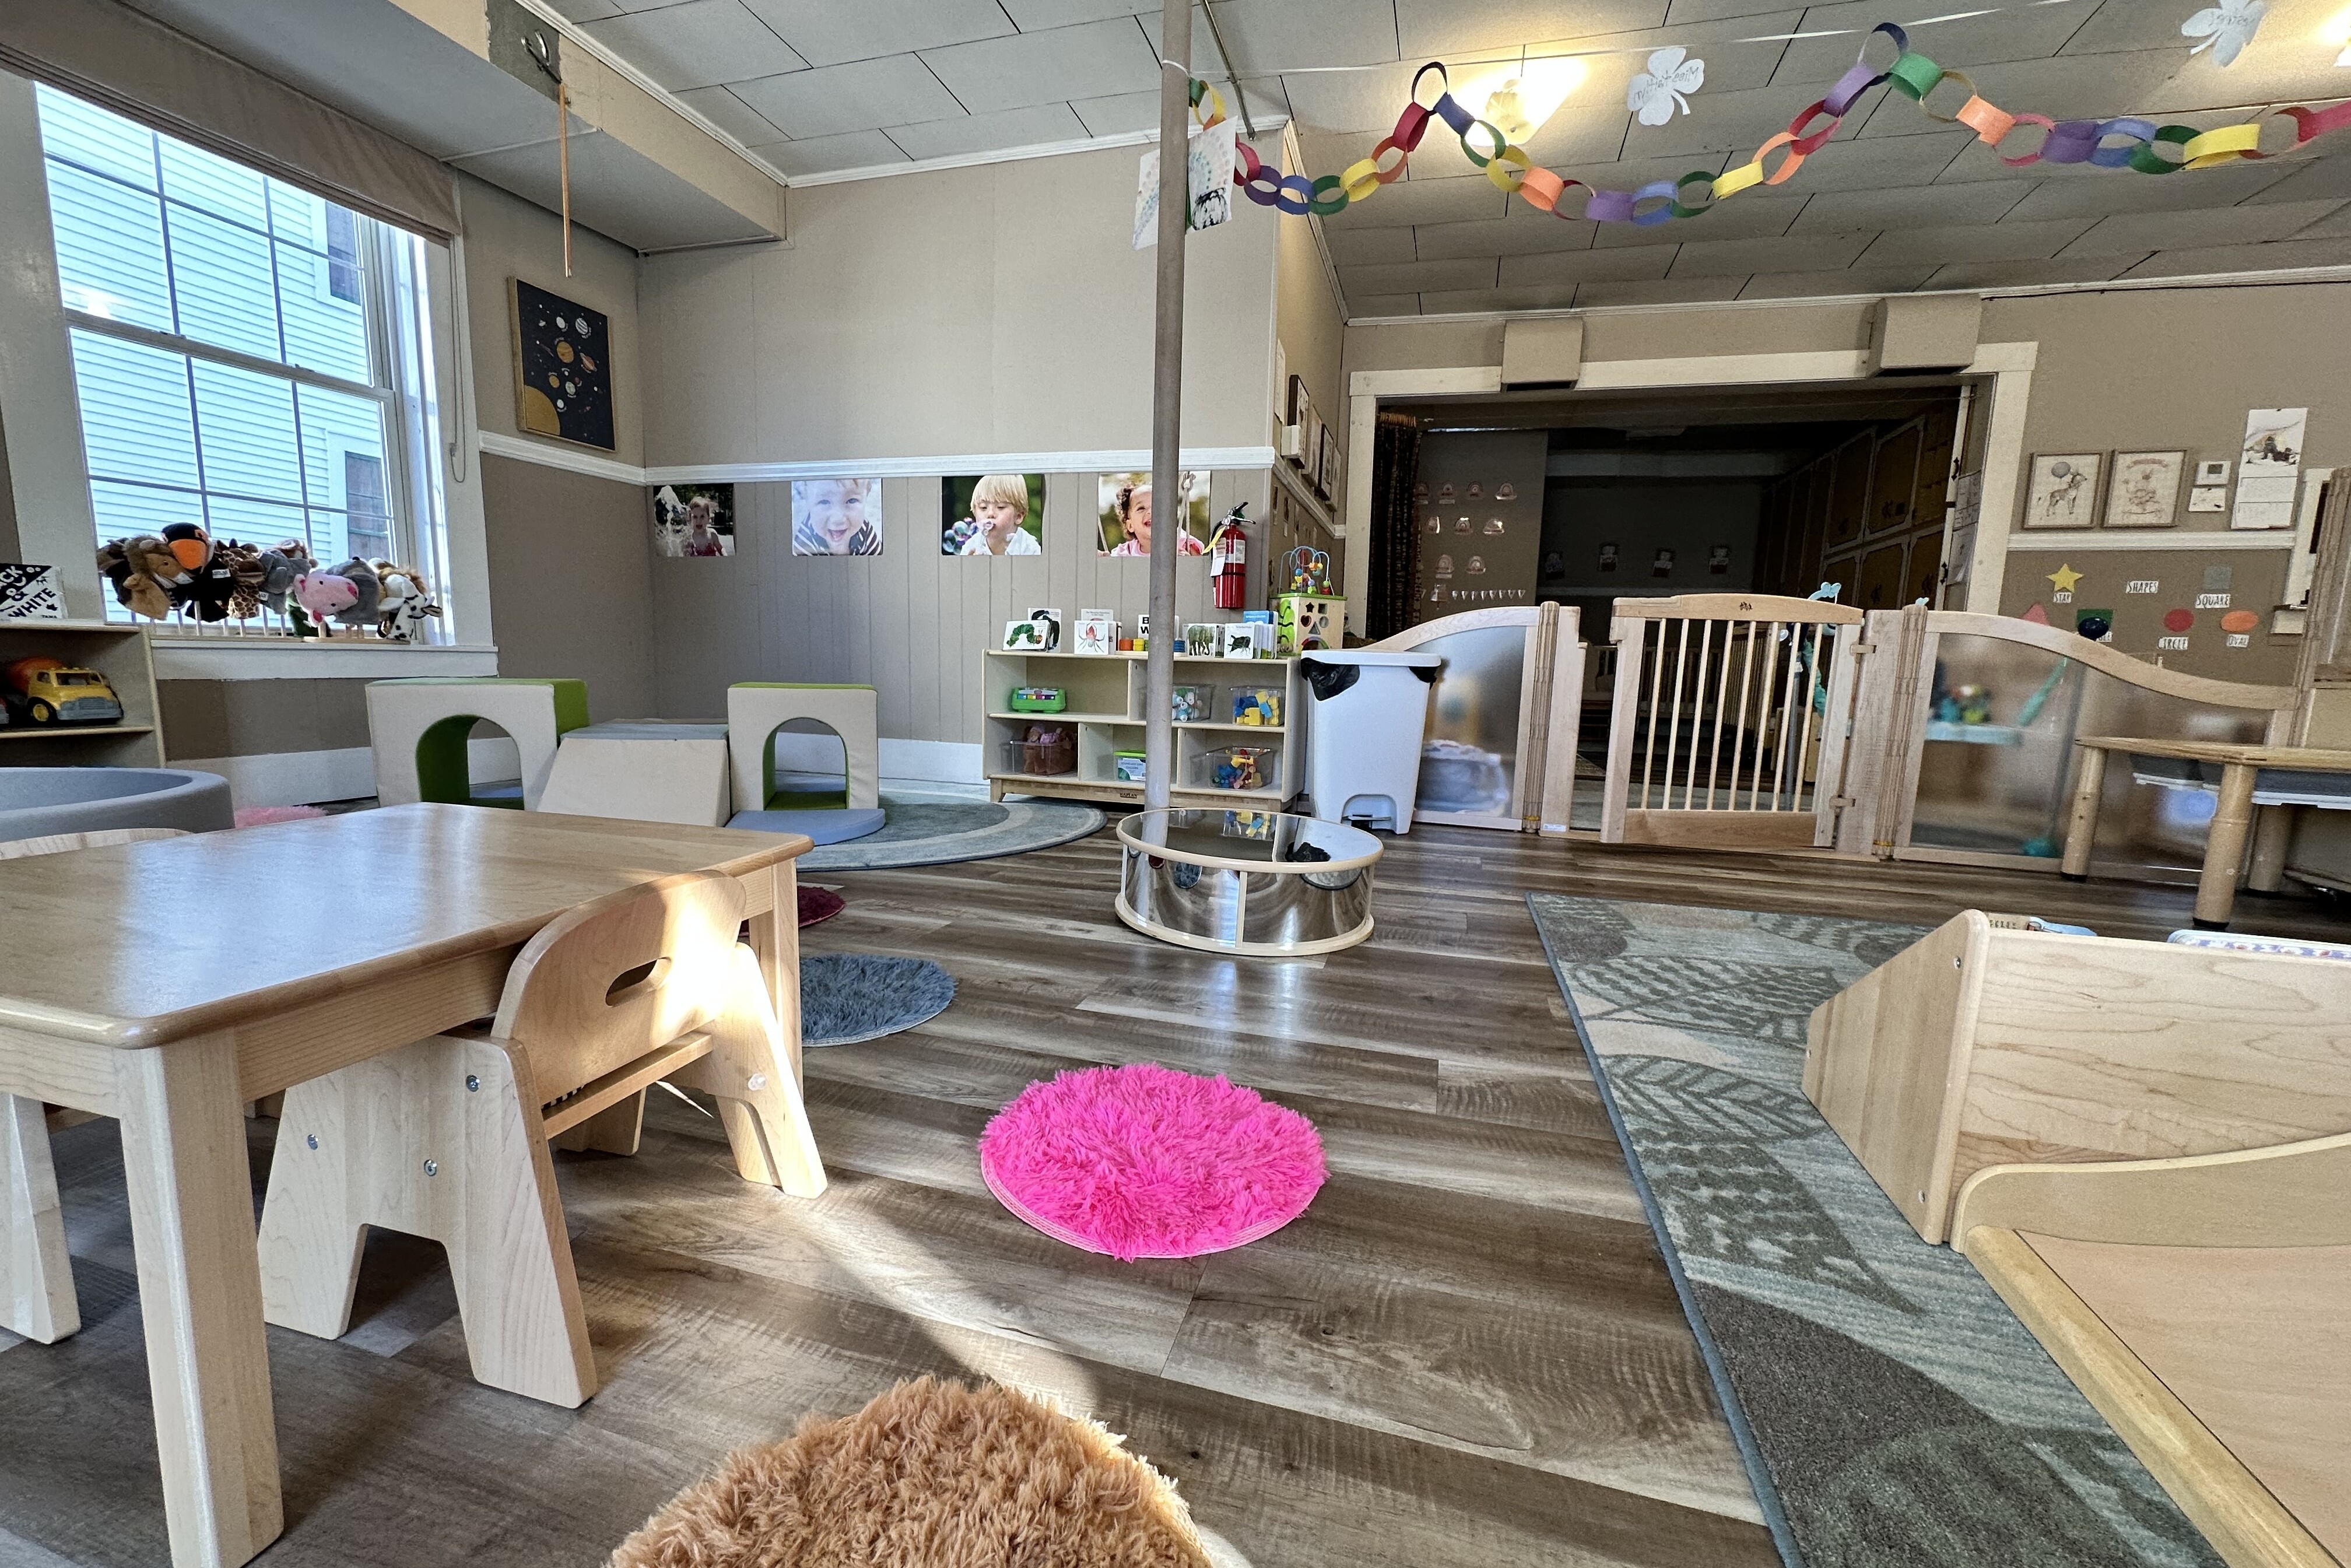 Cabot Children’s Center recently opened in Vermont with Act 76 funding.